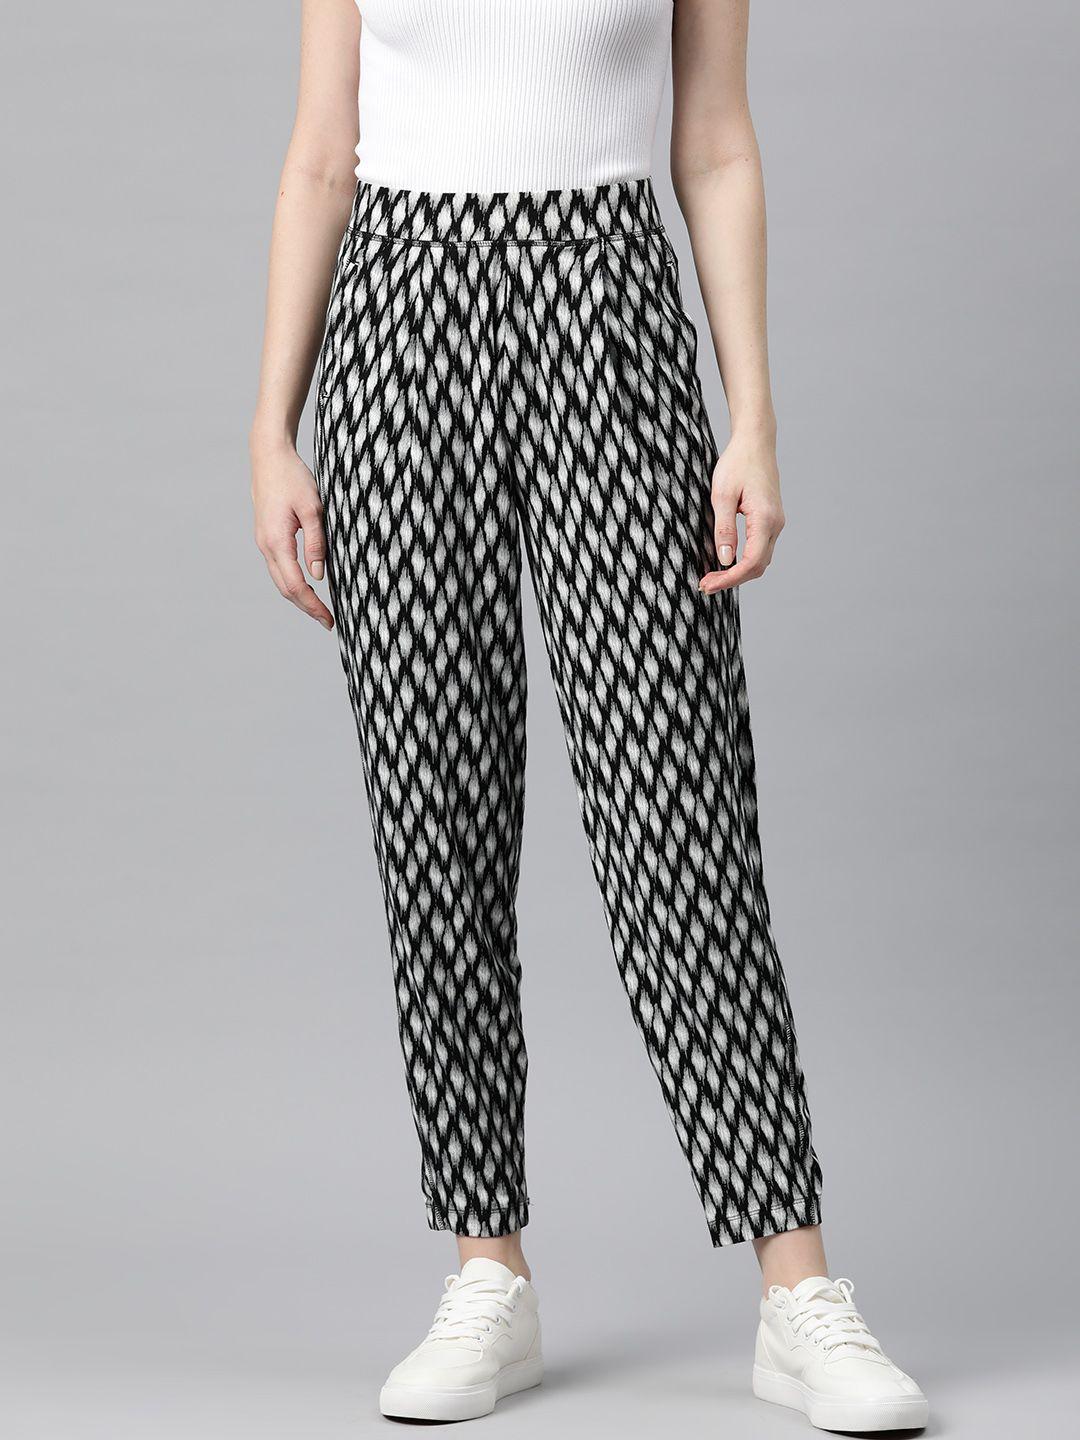 marks-&-spencer-women-printed-high-rise-trousers